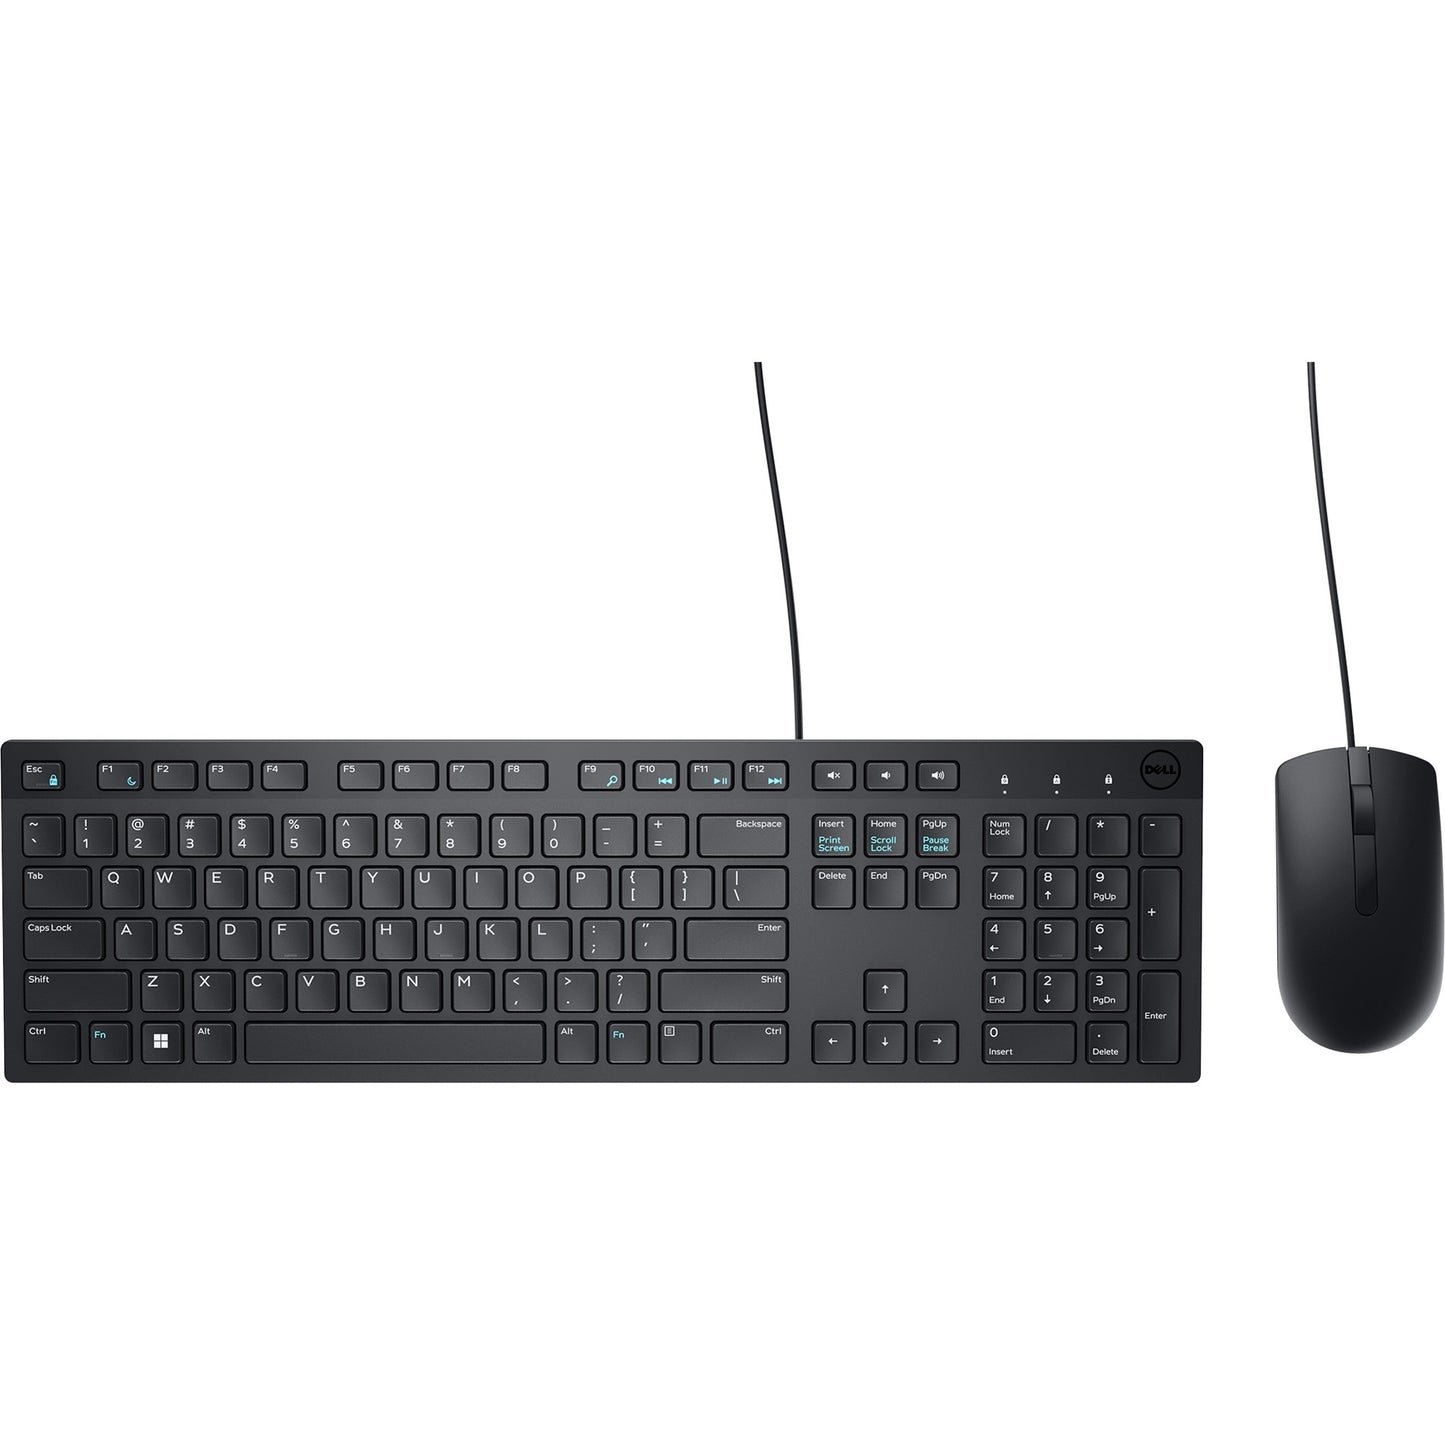 Dell Wired Keyboard and Mouse - KM300C - USB Keyboard SpadezStore